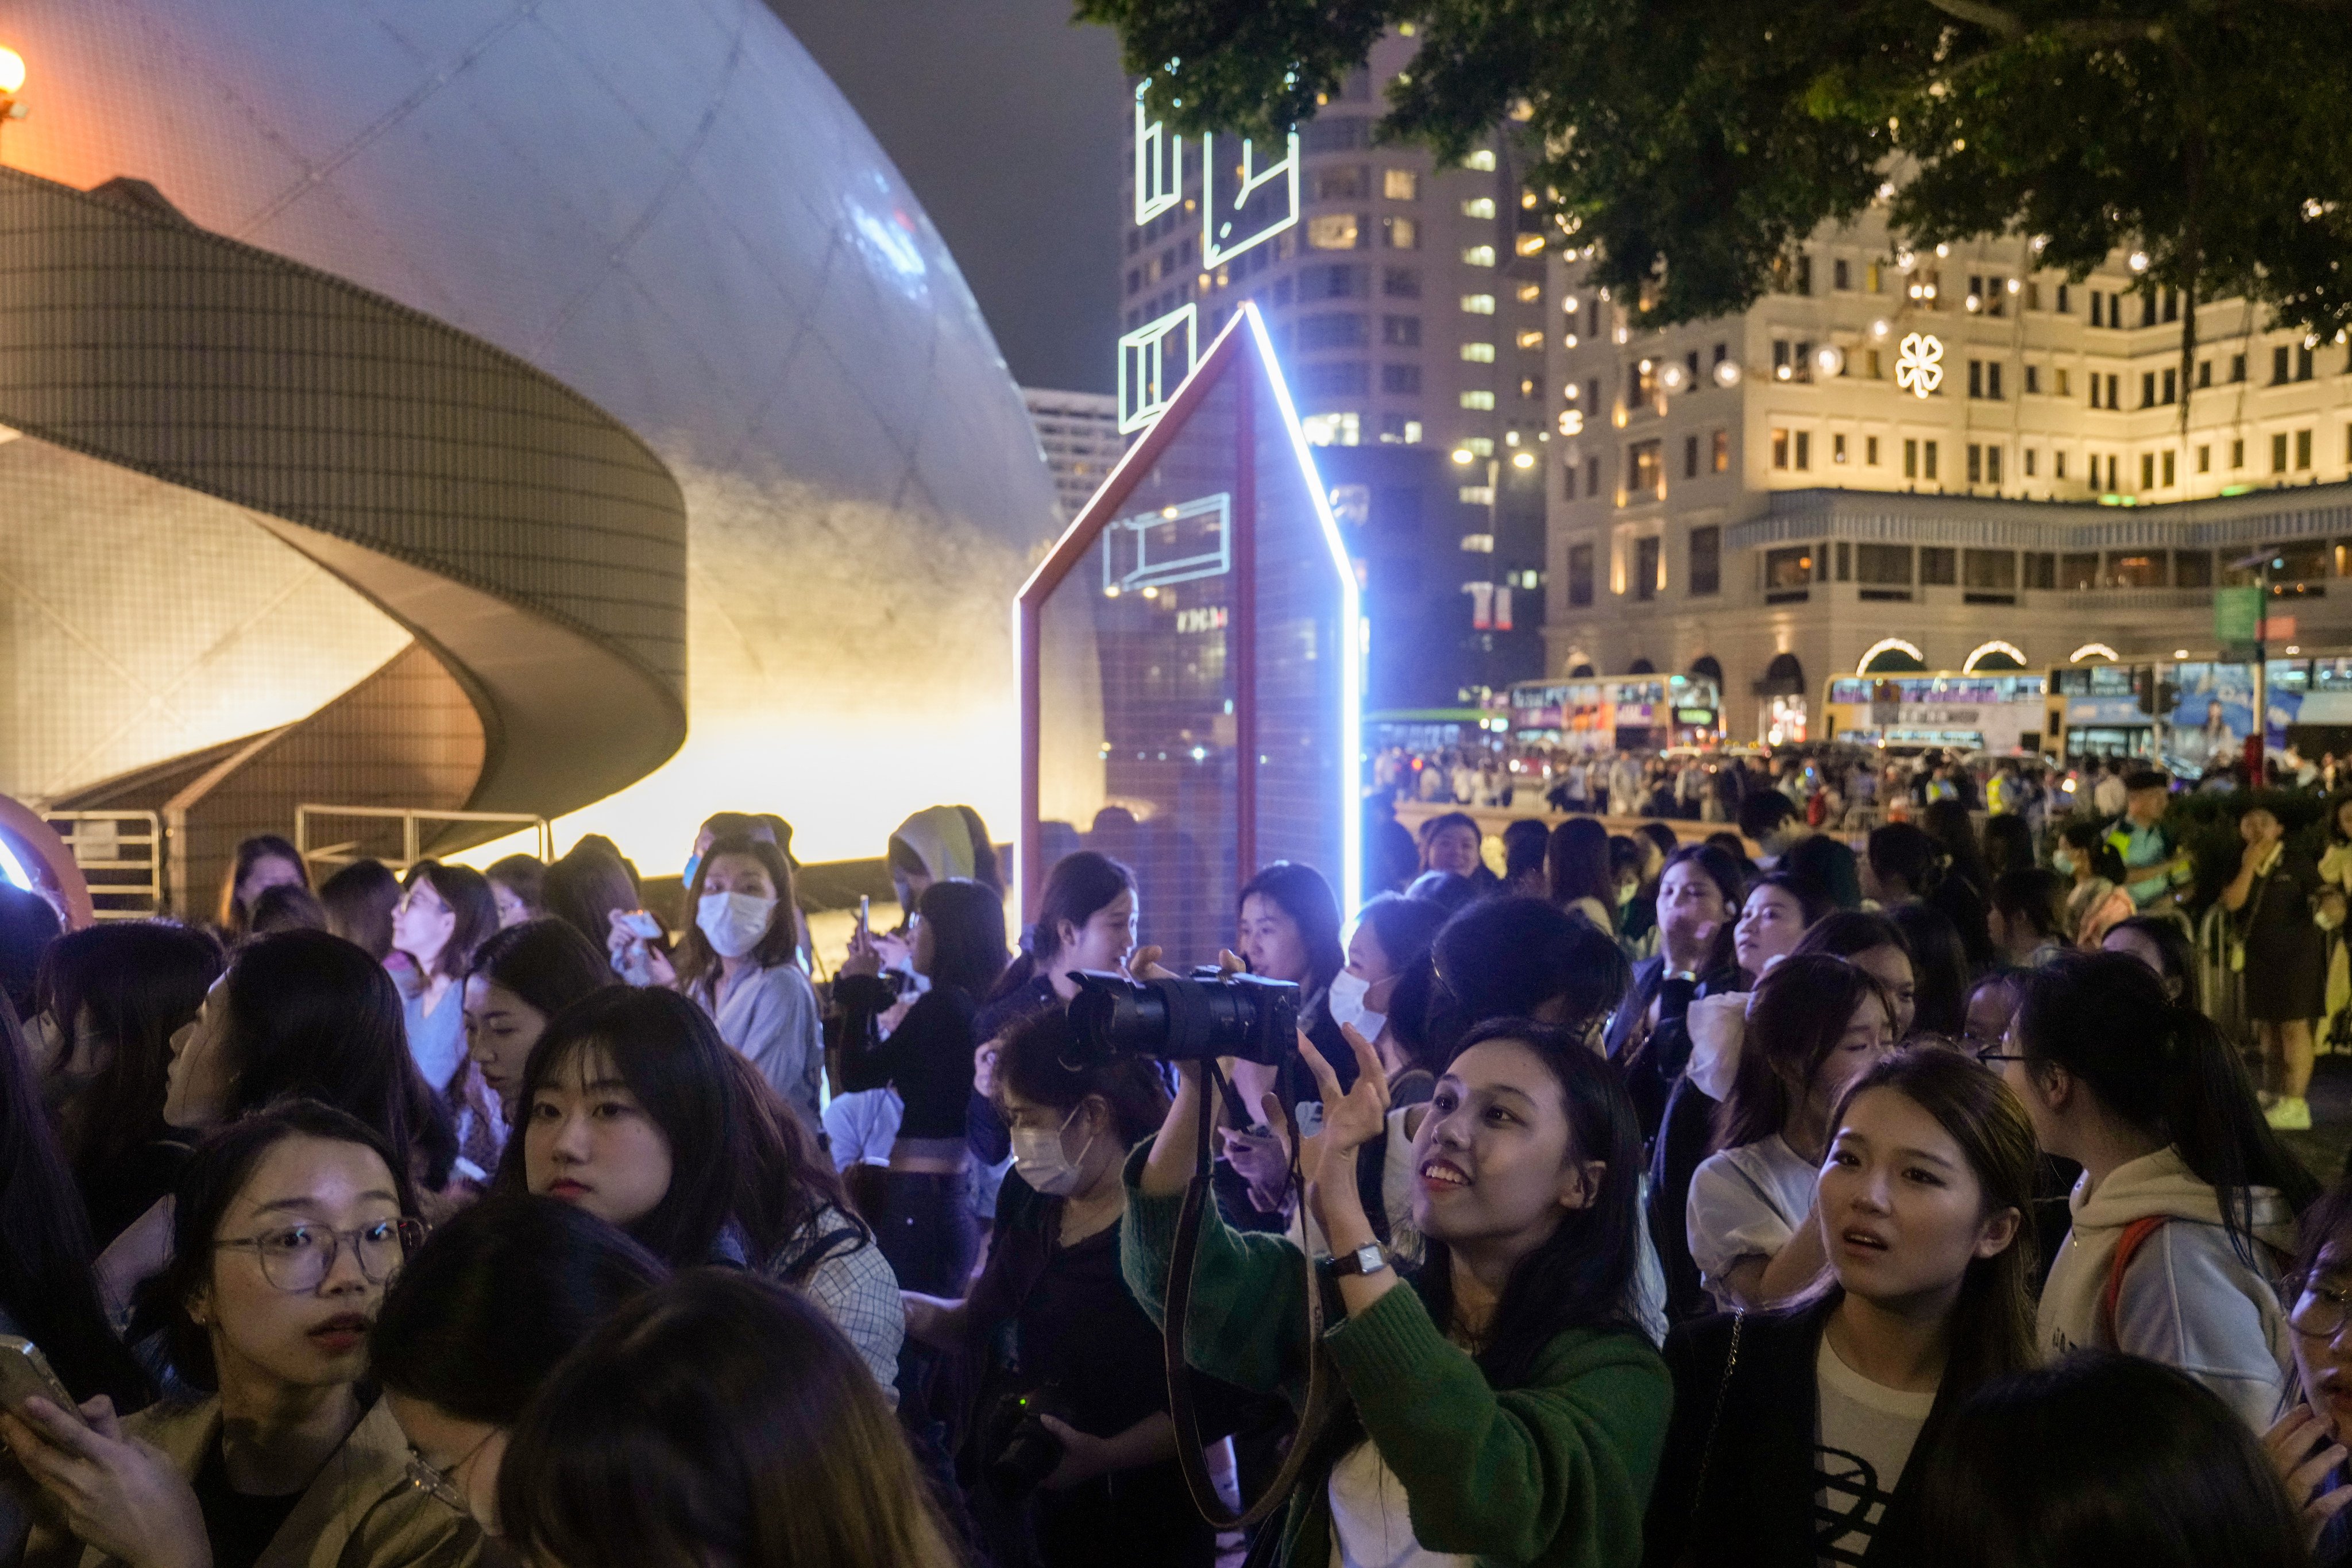 Crowds throng around the Avenue of Stars venue for a star=studded Louis Vuitton fashon show on Thursday night. Photo: Sam Tsang